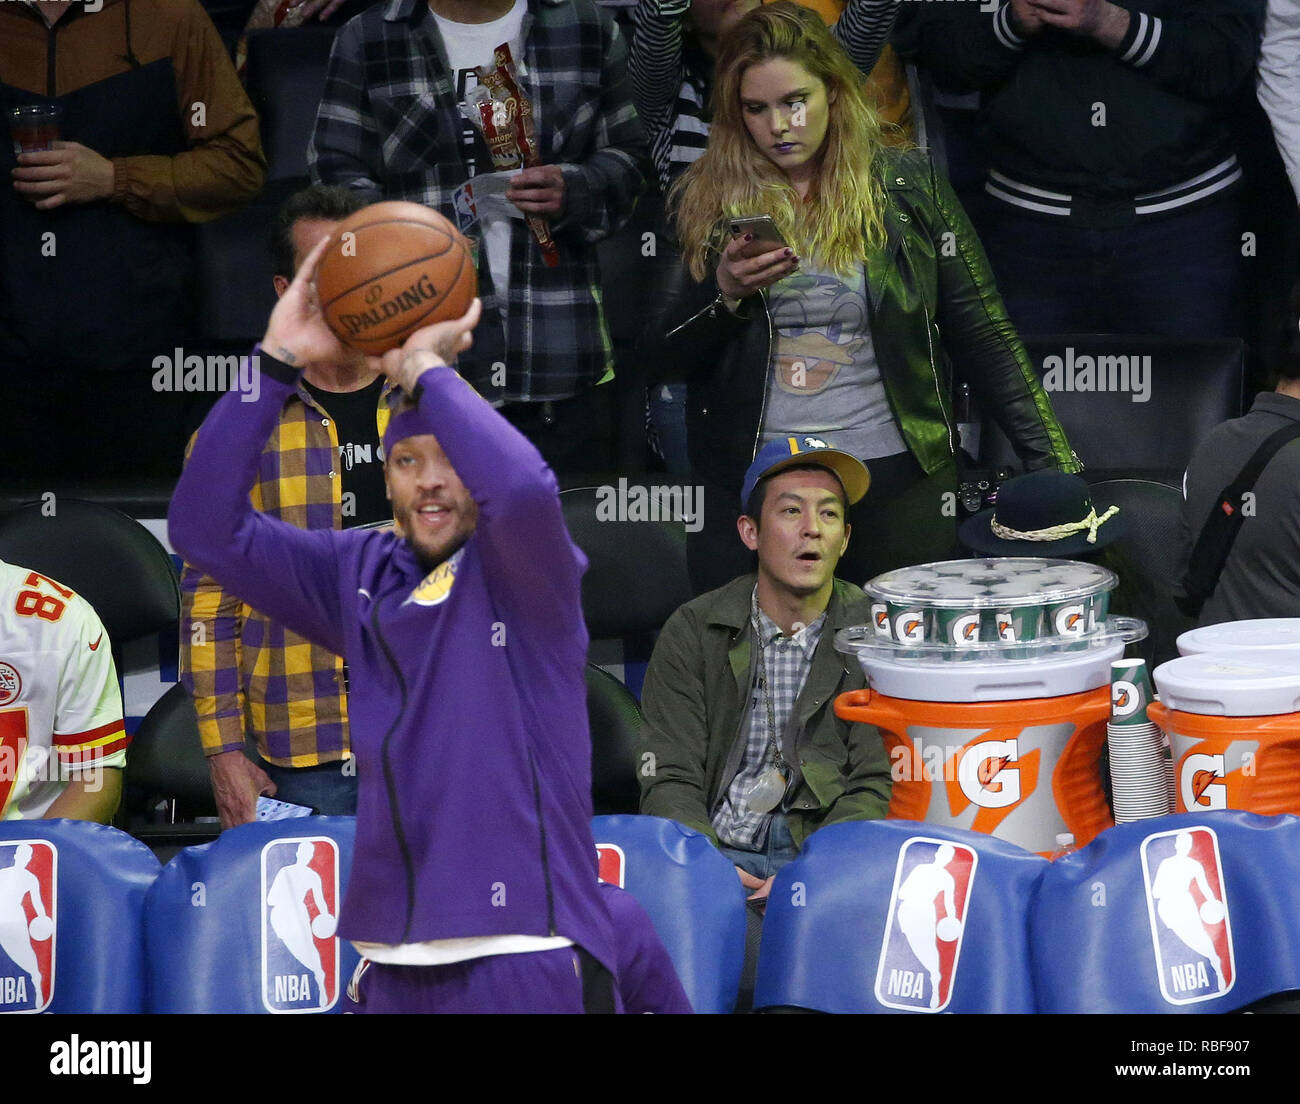 Los Angeles, California, USA. 9th Jan, 2019. Hong Kong-Canadian actor Edison Chen, as know as Edison Koon-hei Chen, Chen Guanxi, attends an NBA basketball game between Los Angeles Lakers and Detroit Pistons Wednesday, Jan. 9, 2019, in Los Angeles. Credit: Ringo Chiu/ZUMA Wire/Alamy Live News Stock Photo